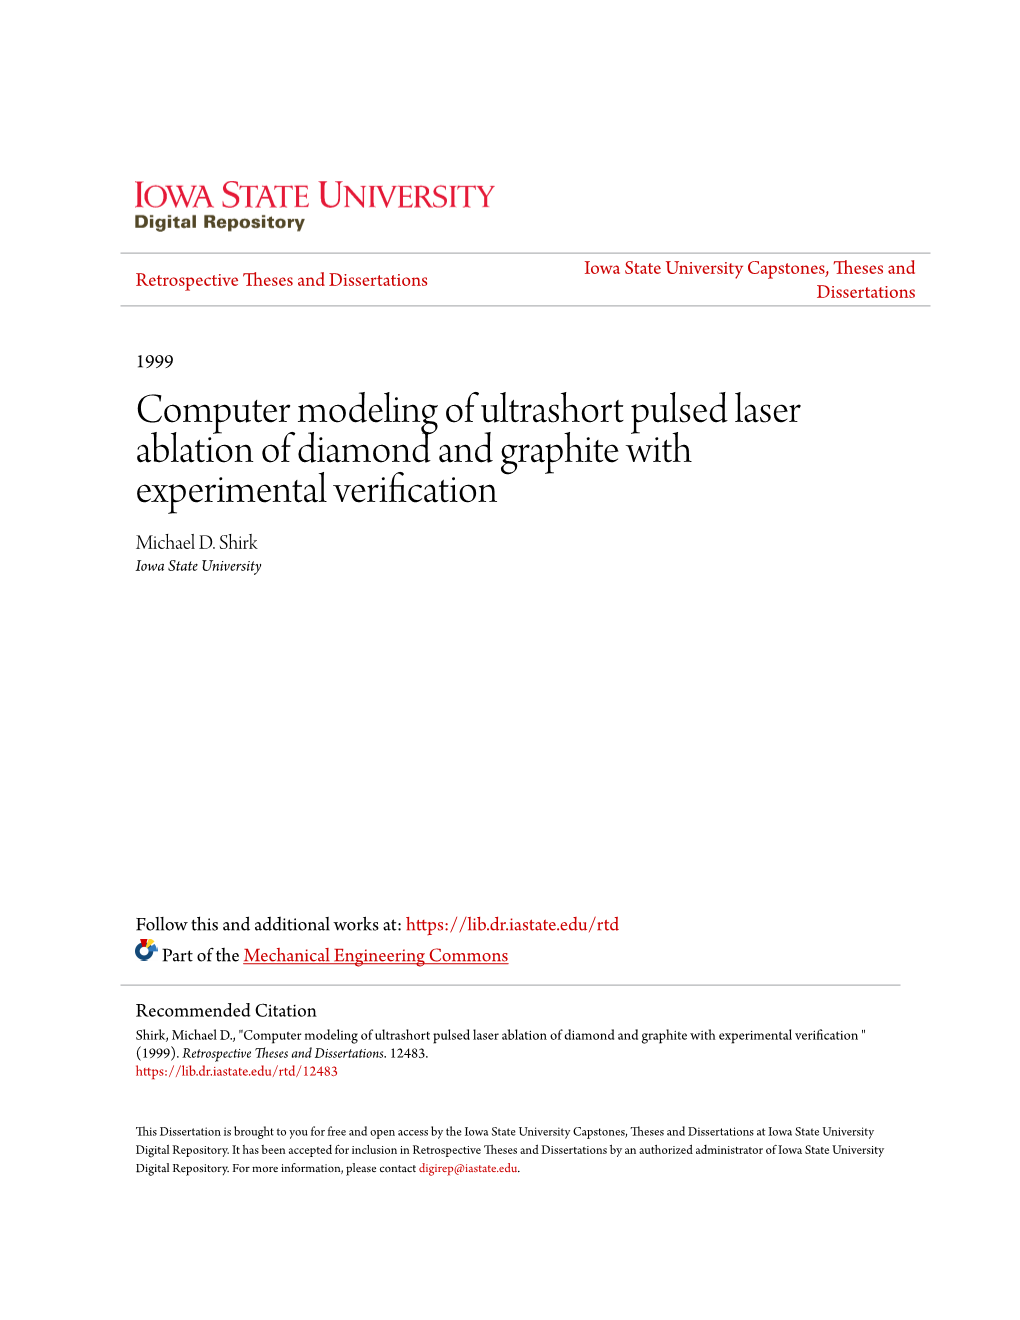 Computer Modeling of Ultrashort Pulsed Laser Ablation of Diamond and Graphite with Experimental Verification Michael D